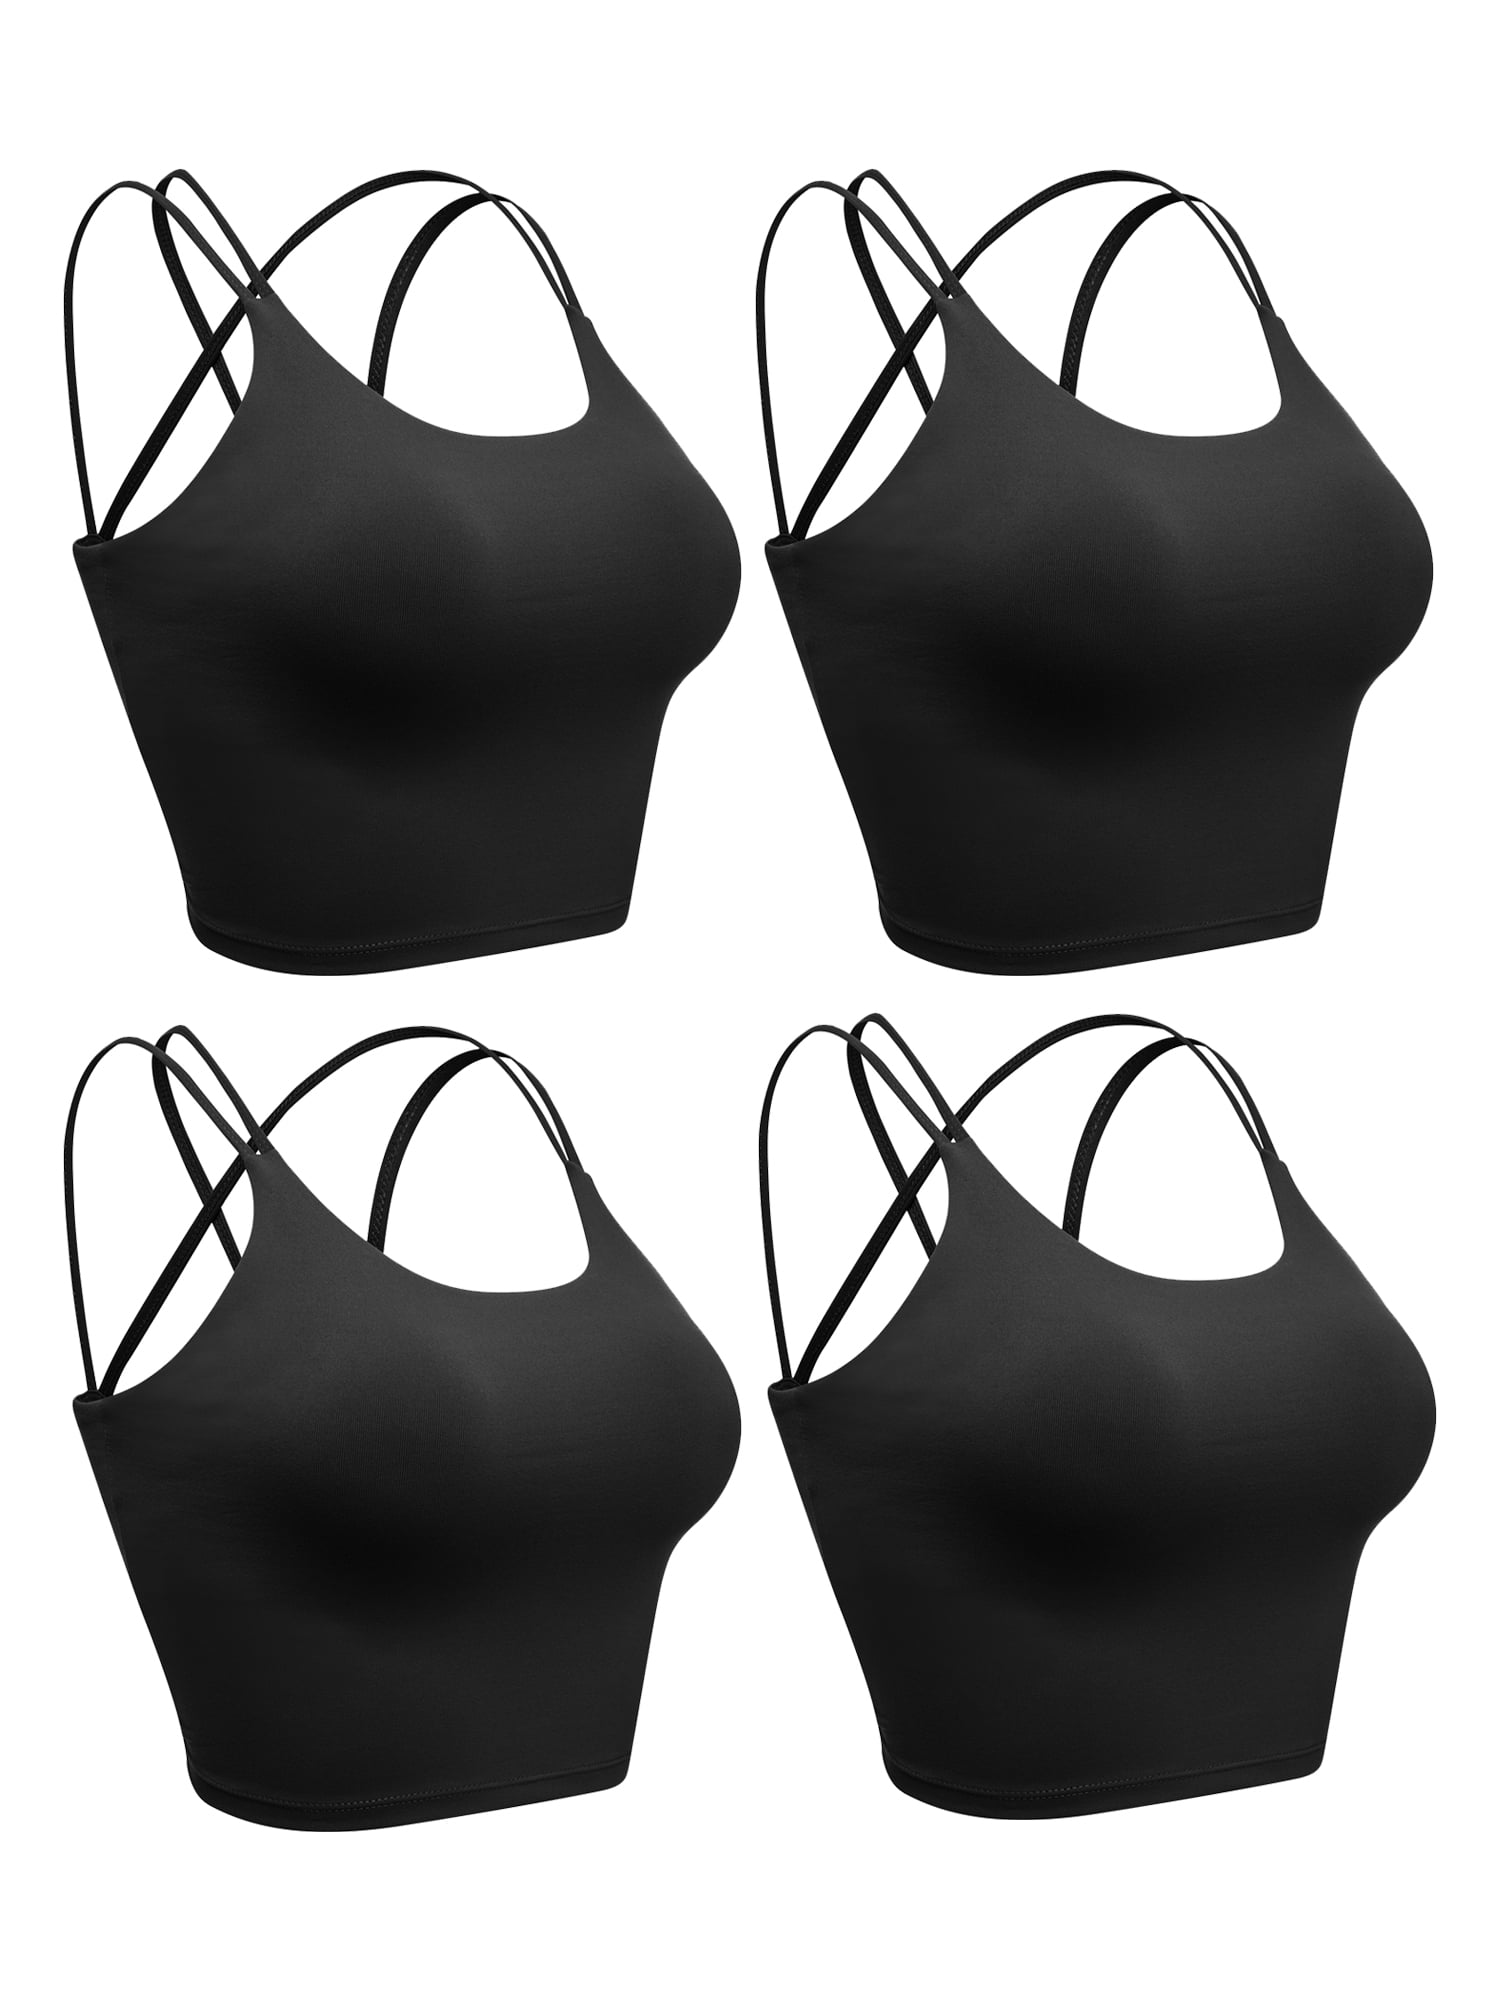 Women Seamless Fitness Bra Cups Removable Workout Tops Yoga Sports Activewear 